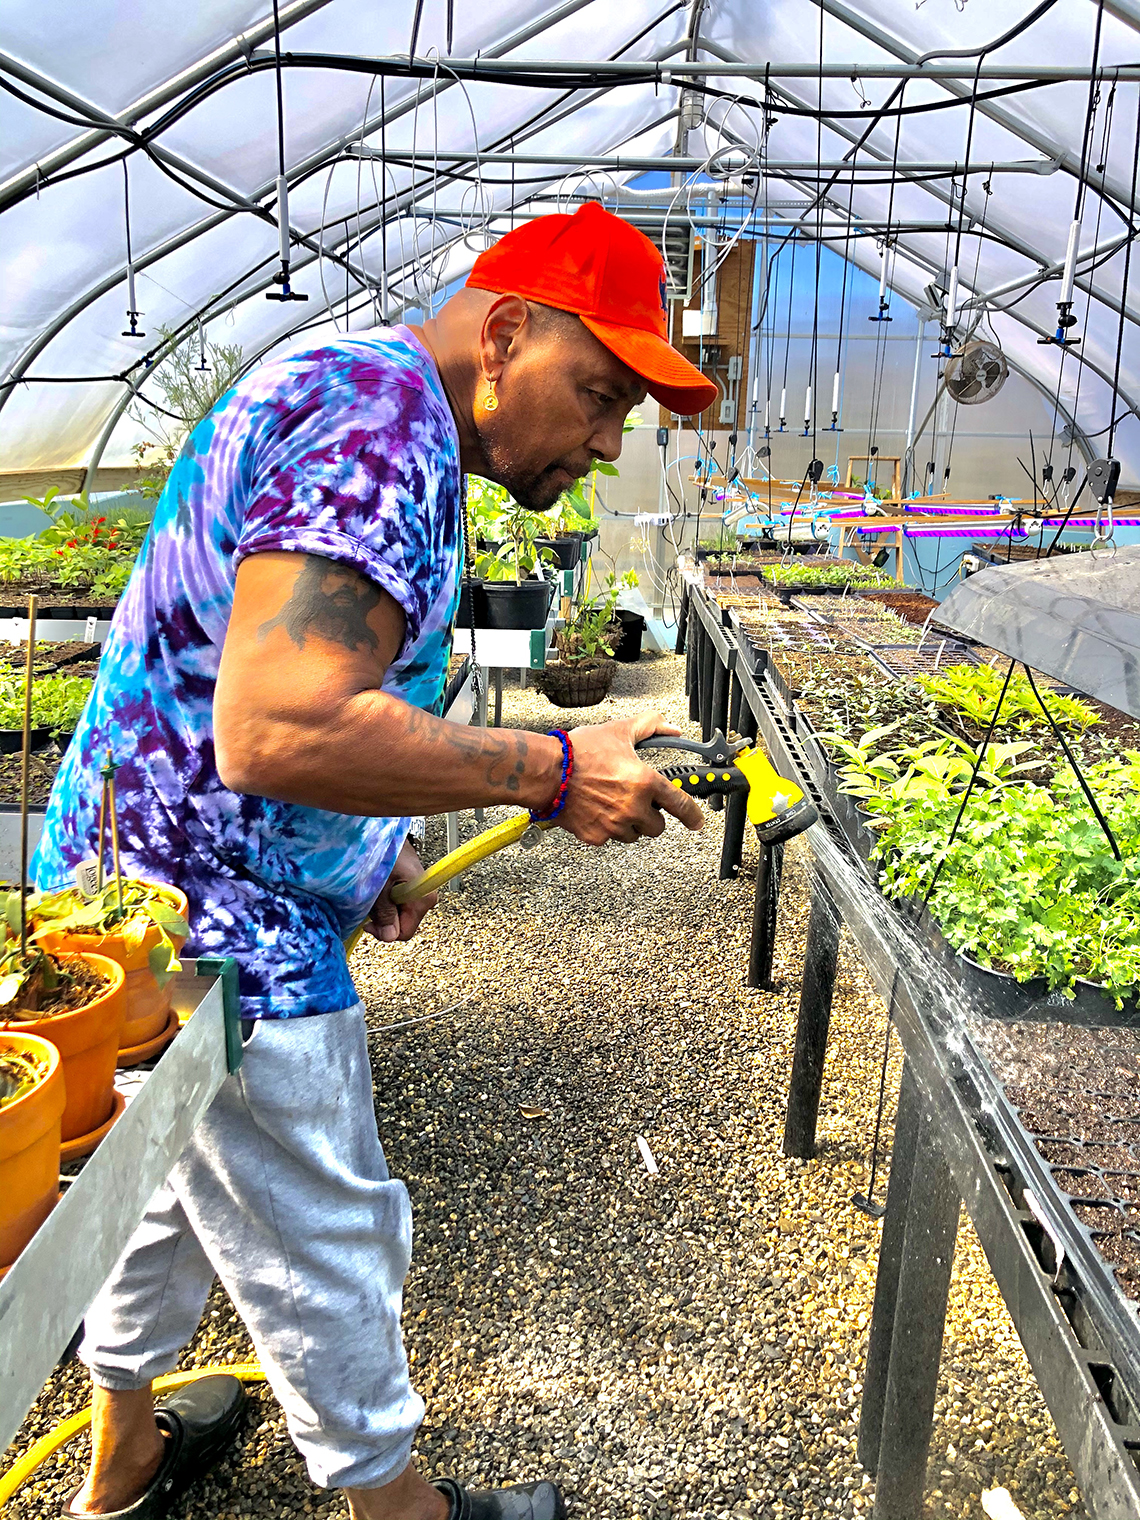 Aaron Neville doing some watering of plants inside the greenhouse at his farm